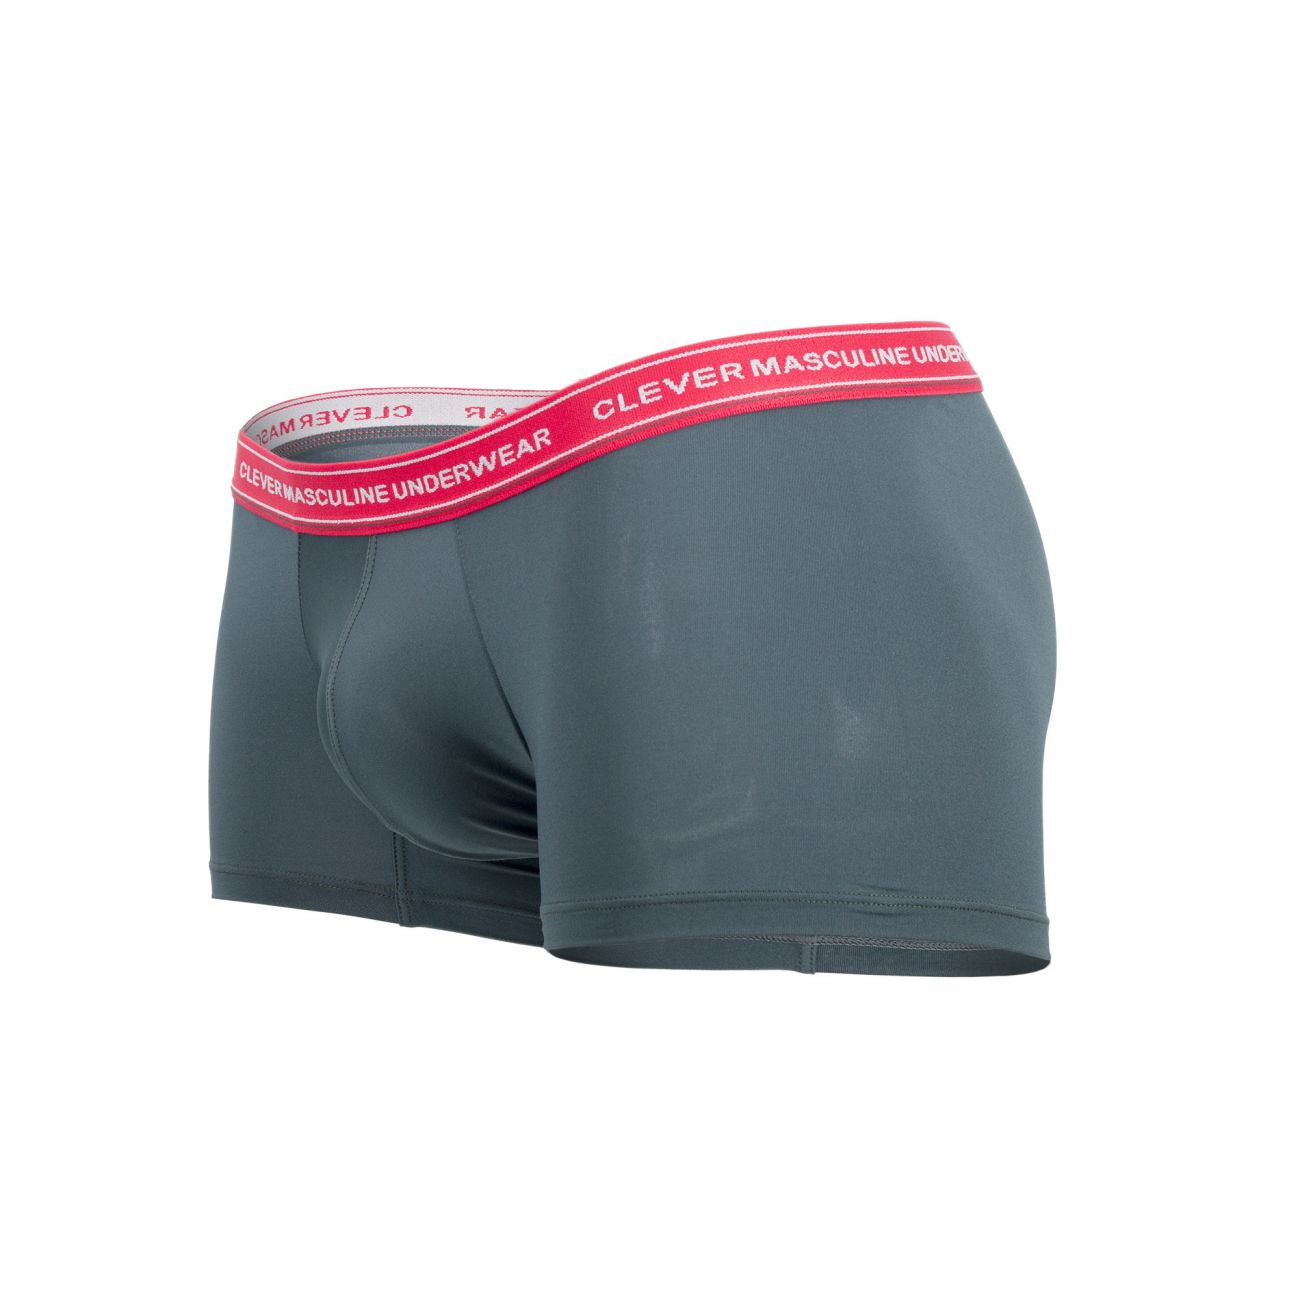 Clever 2199 Limited Edition Boxer Briefs Trunks Green